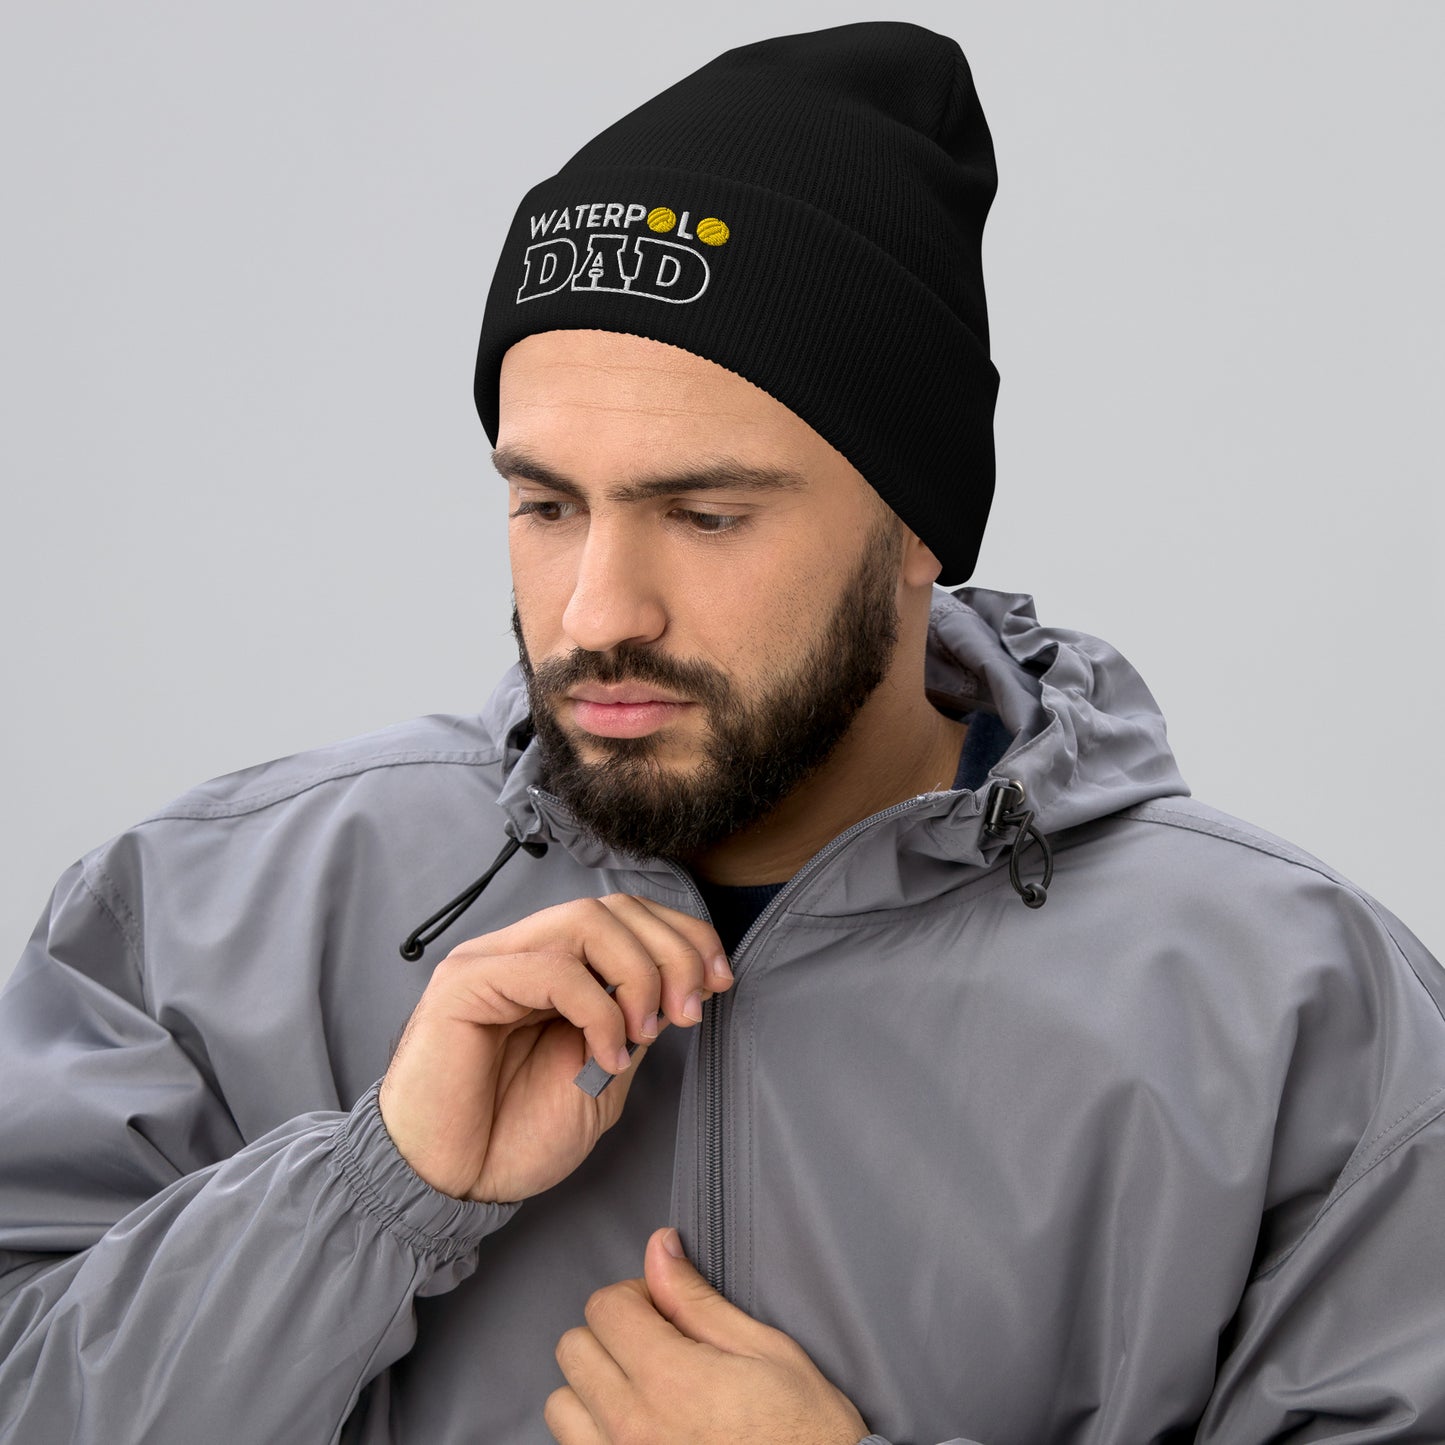 Waterpolo Dad - Embroidered Cuffed Beanie | Yupoong 1501KC